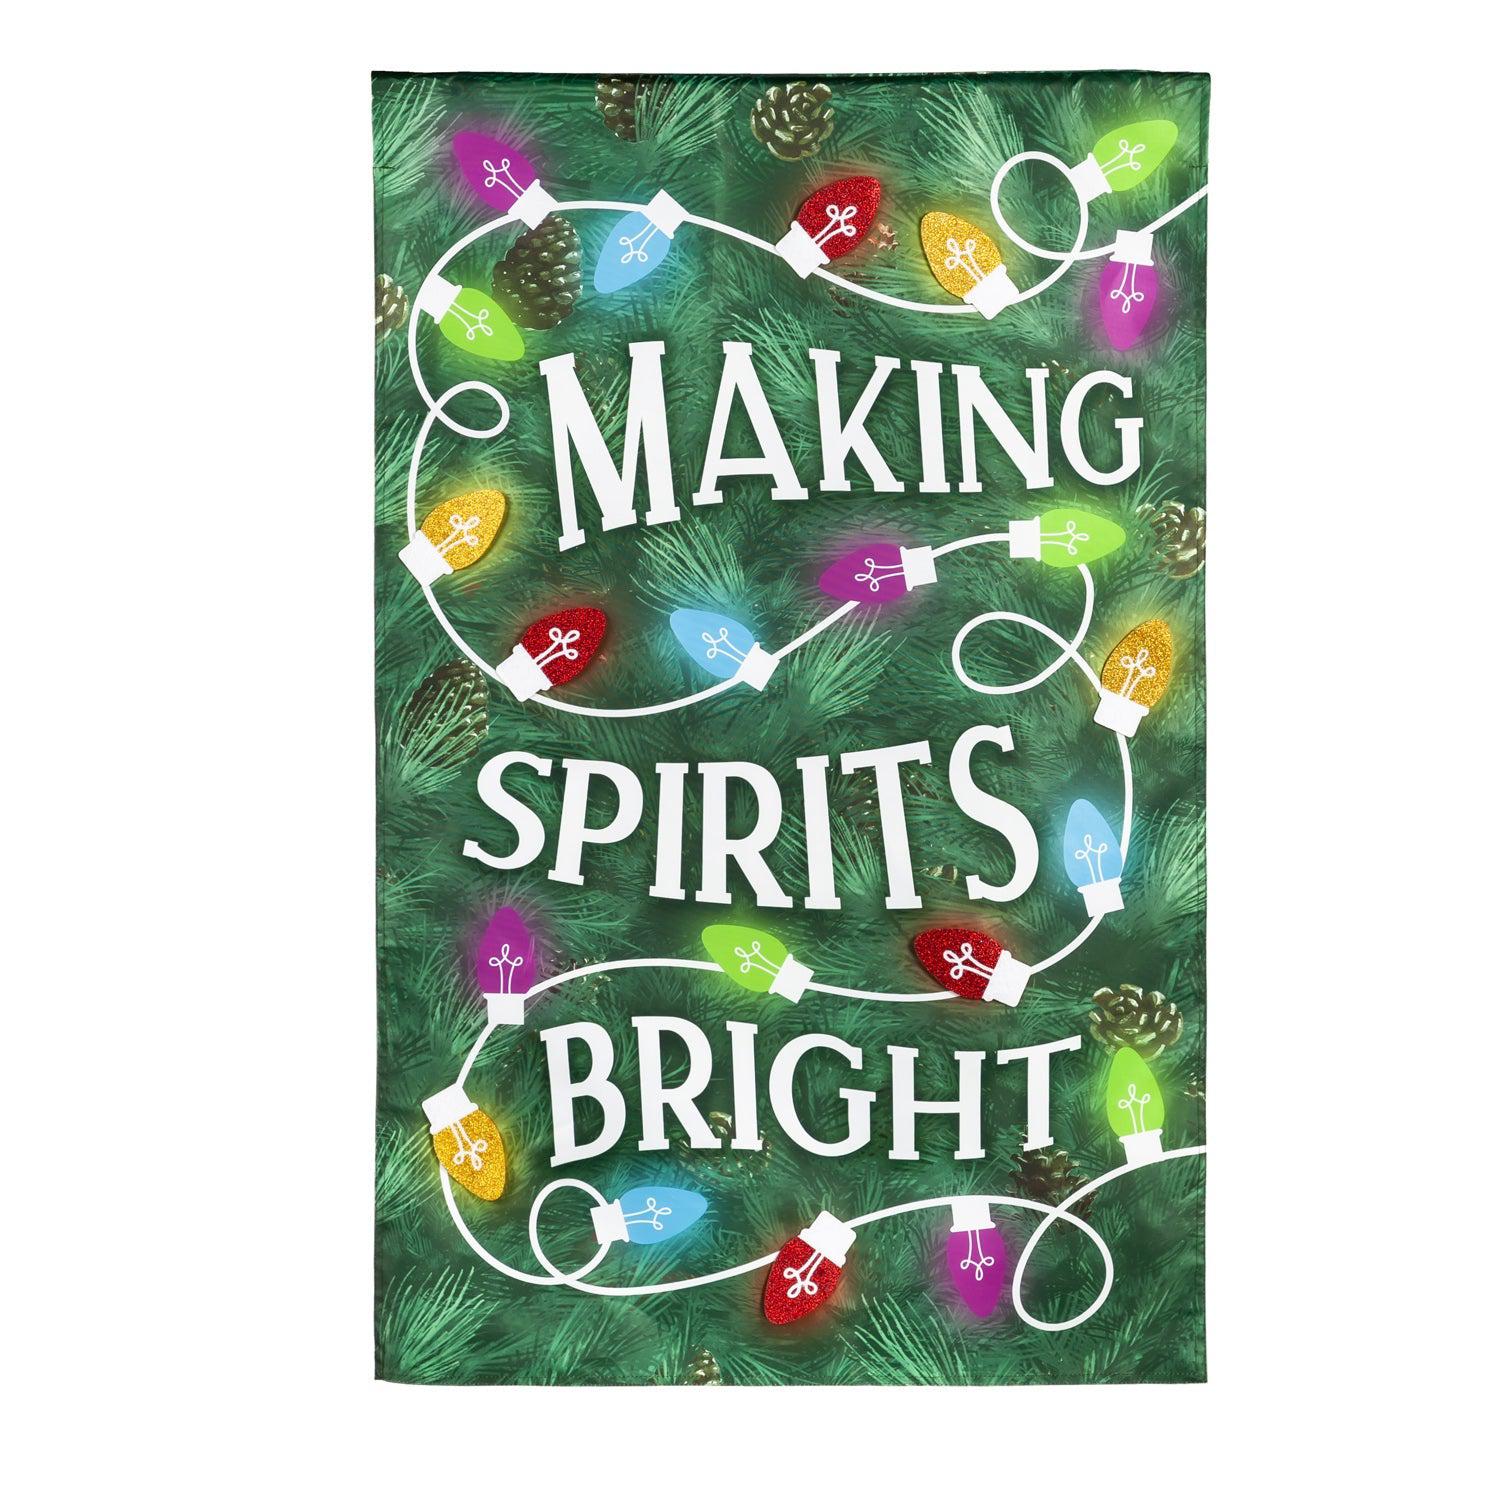 The Making Spirits Bright house banner features a green pine needle background with a string of brightly colored Christmas lights. 